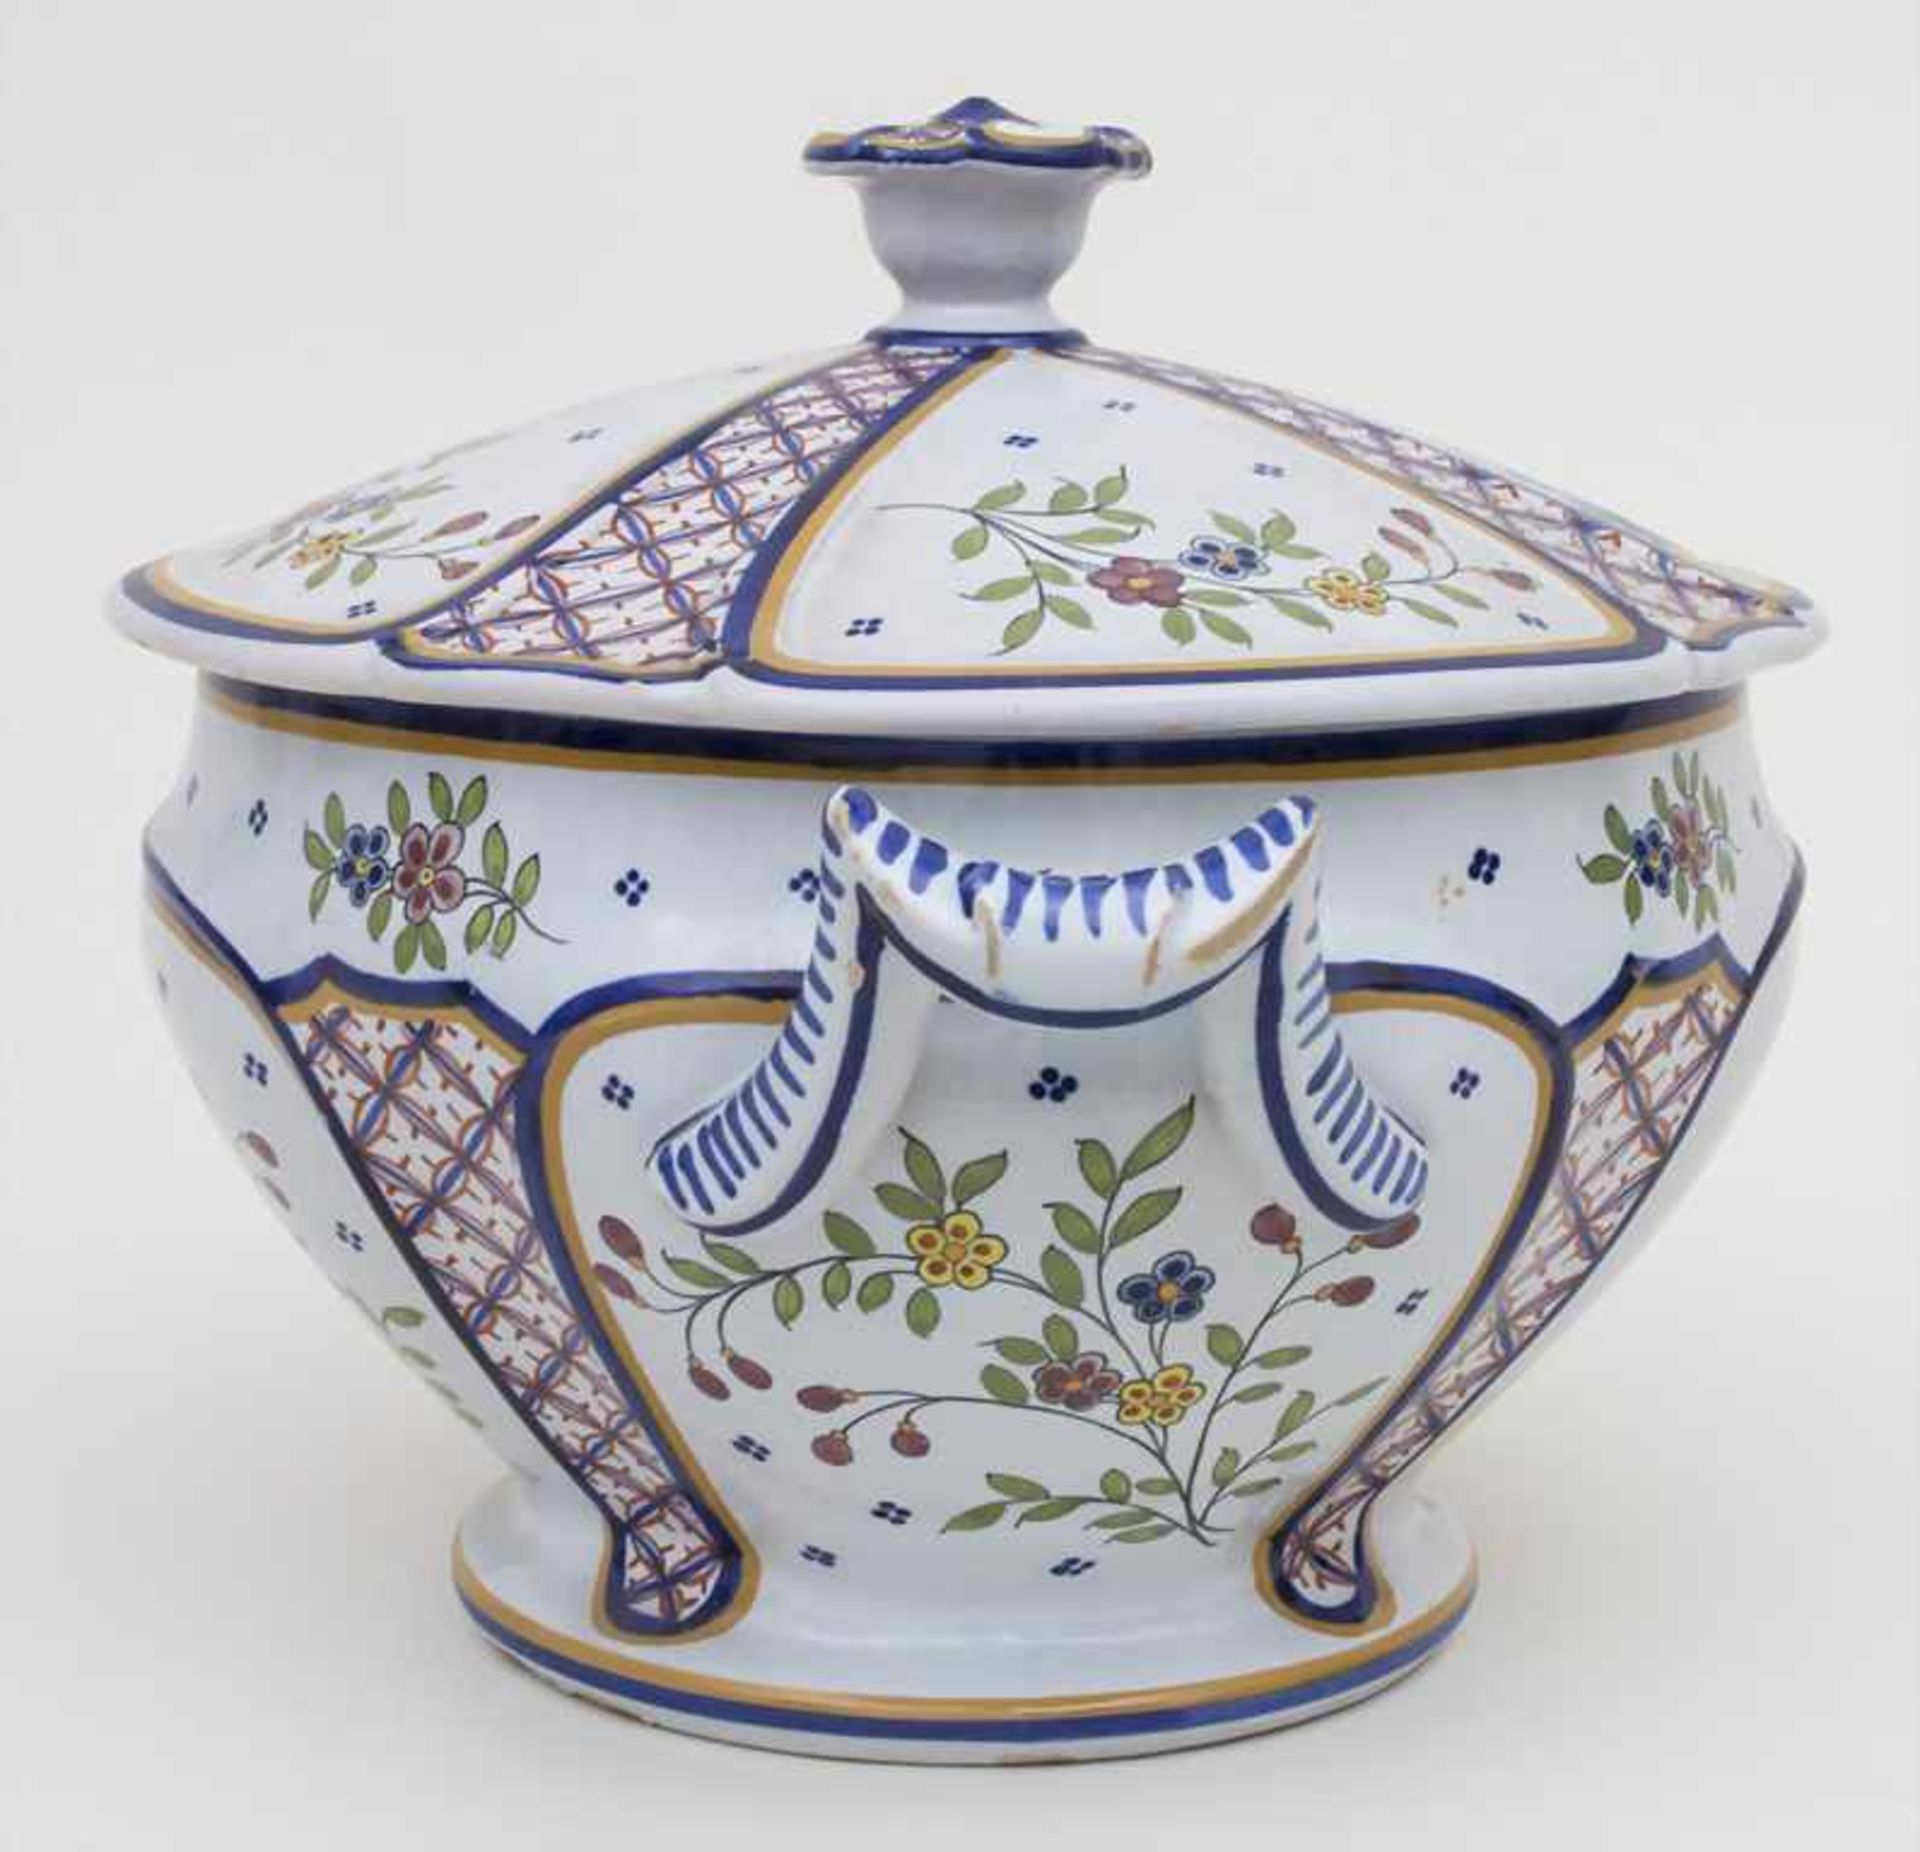 Fayence Deckelterrine / A faience tureen, Quimper, Bretagne, Frankreich, 20. Jh.Material: Fayence, - Image 4 of 9